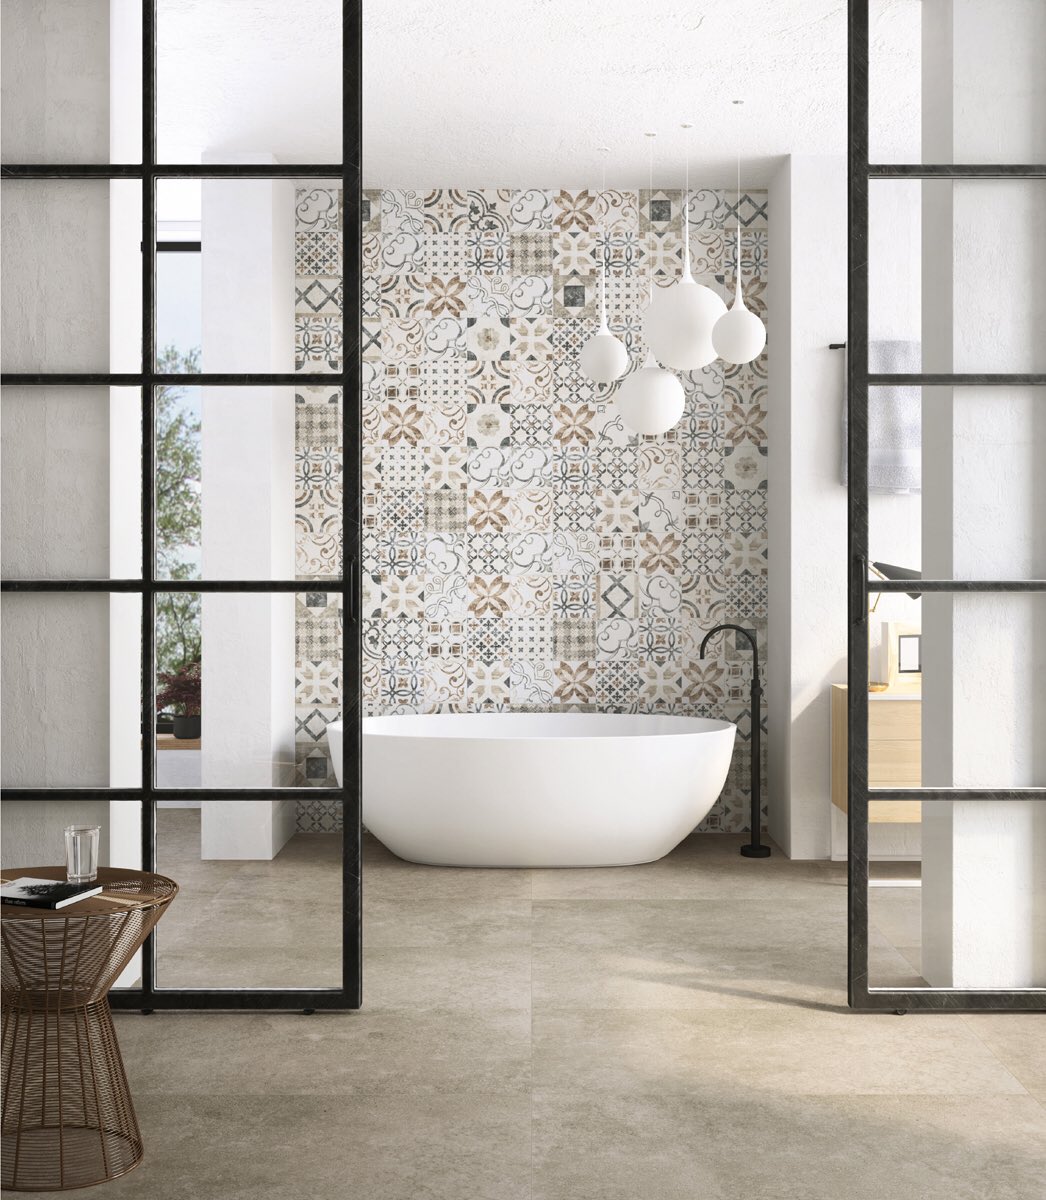 FRIDAY FEELING 🛁
We can’t wait to be relaxing in a bath like this. It looks amazing paired with our versatile CENTIMENT tiles!
#fridayfeeling #bath #bathgoals #bathroom #bathrooms #bathroomdecor #bathroomgoals #bathroomstyle #bathroomdesign #bathroomtiles